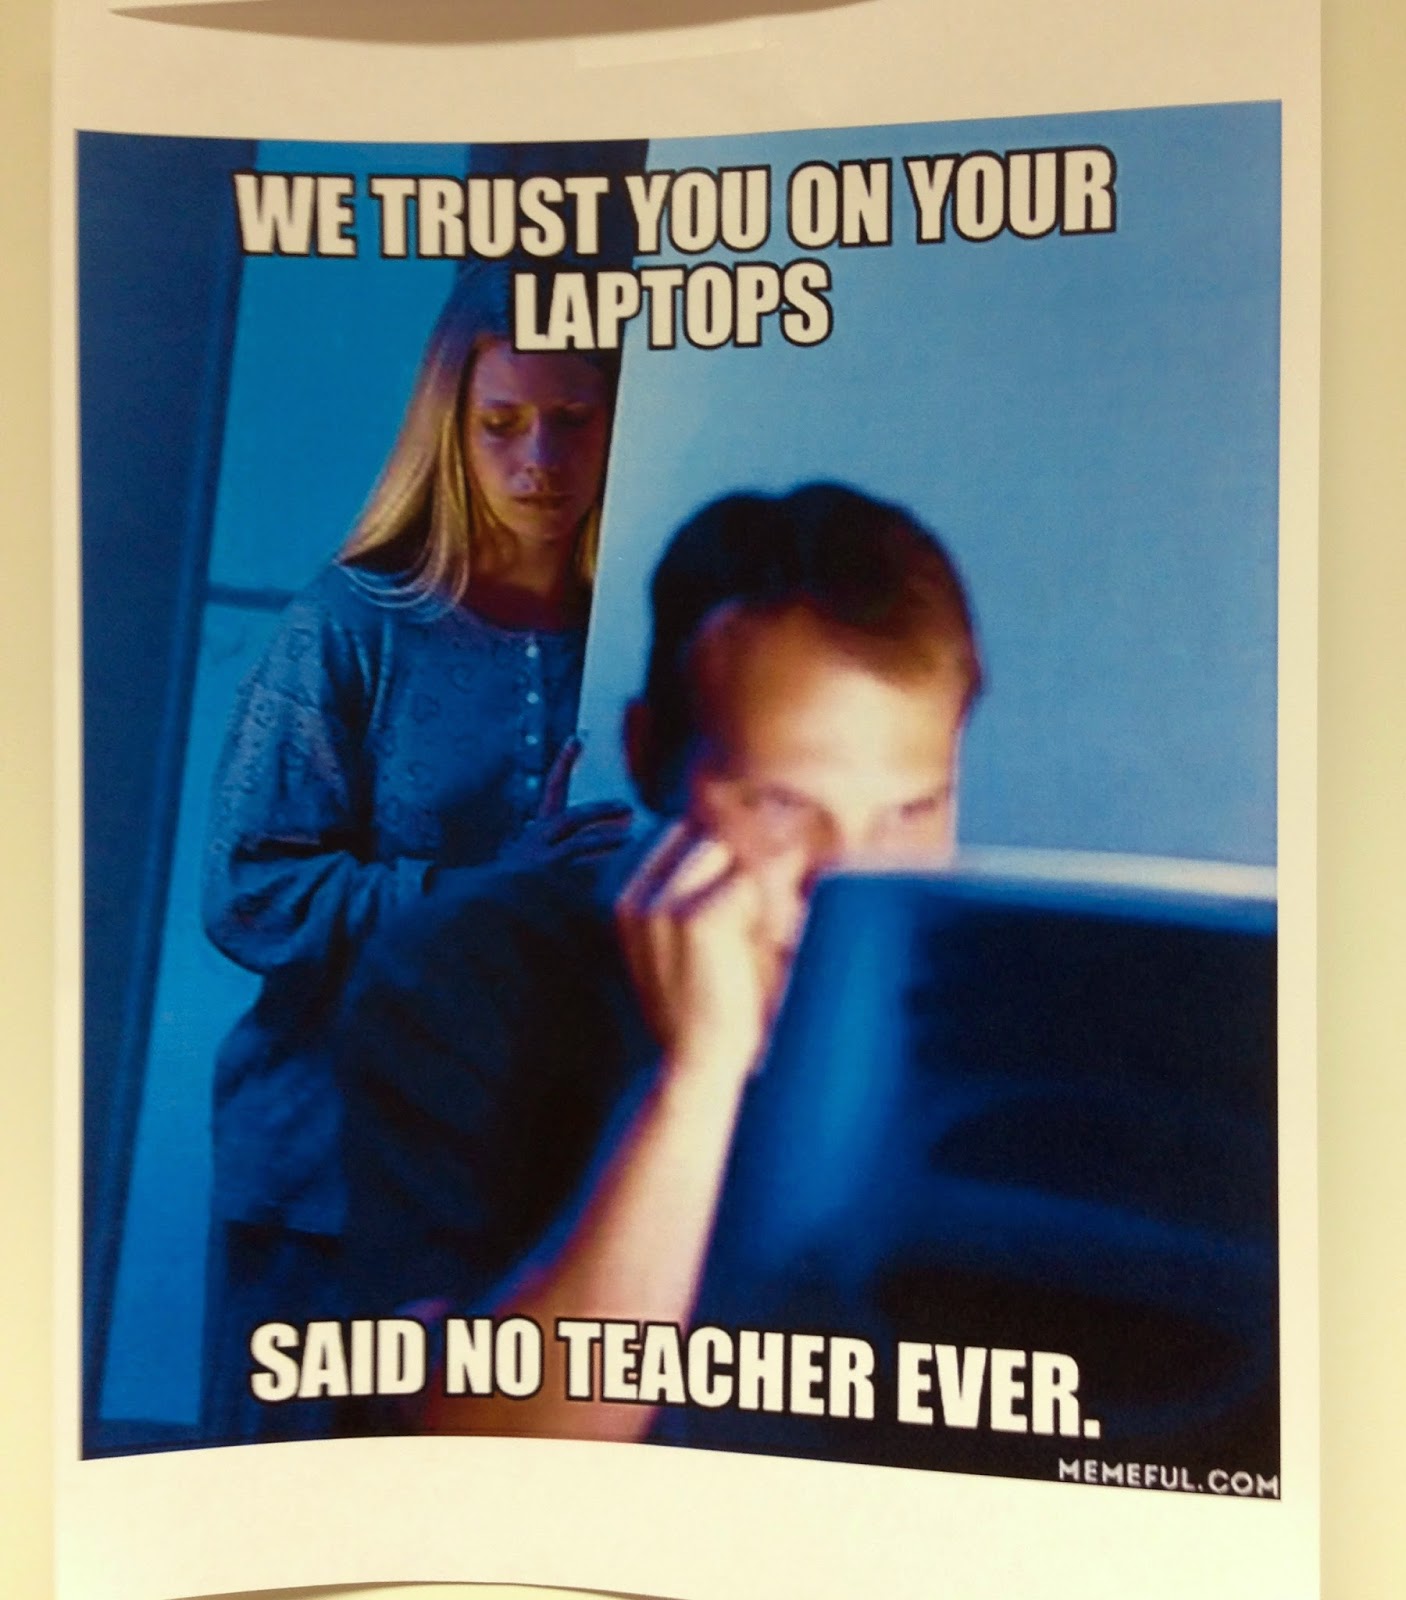 We trust you on your laptops...said no teacher ever. Classroom humor